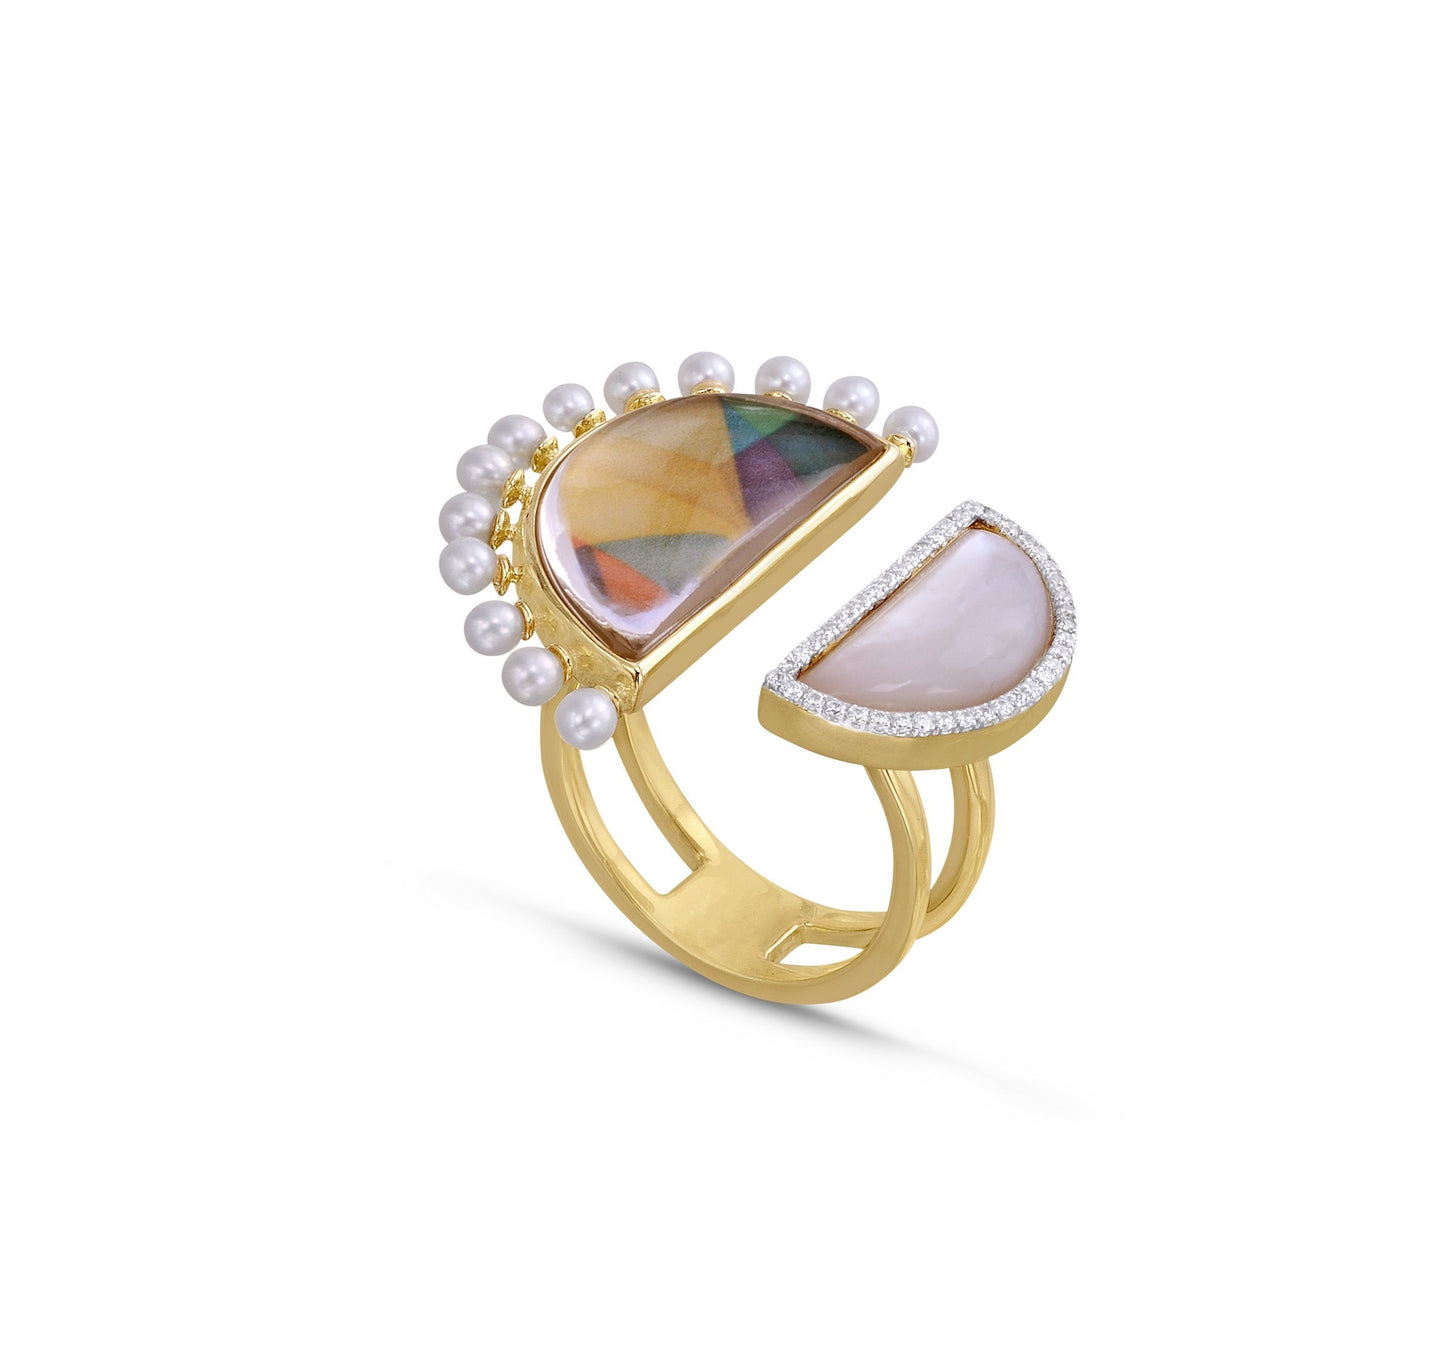 My Colorful Legacy Pearl & Moonstone Diamond Open Ring in 14K Yellow Gold Plated Sterling Silver by LuvMyJewelry